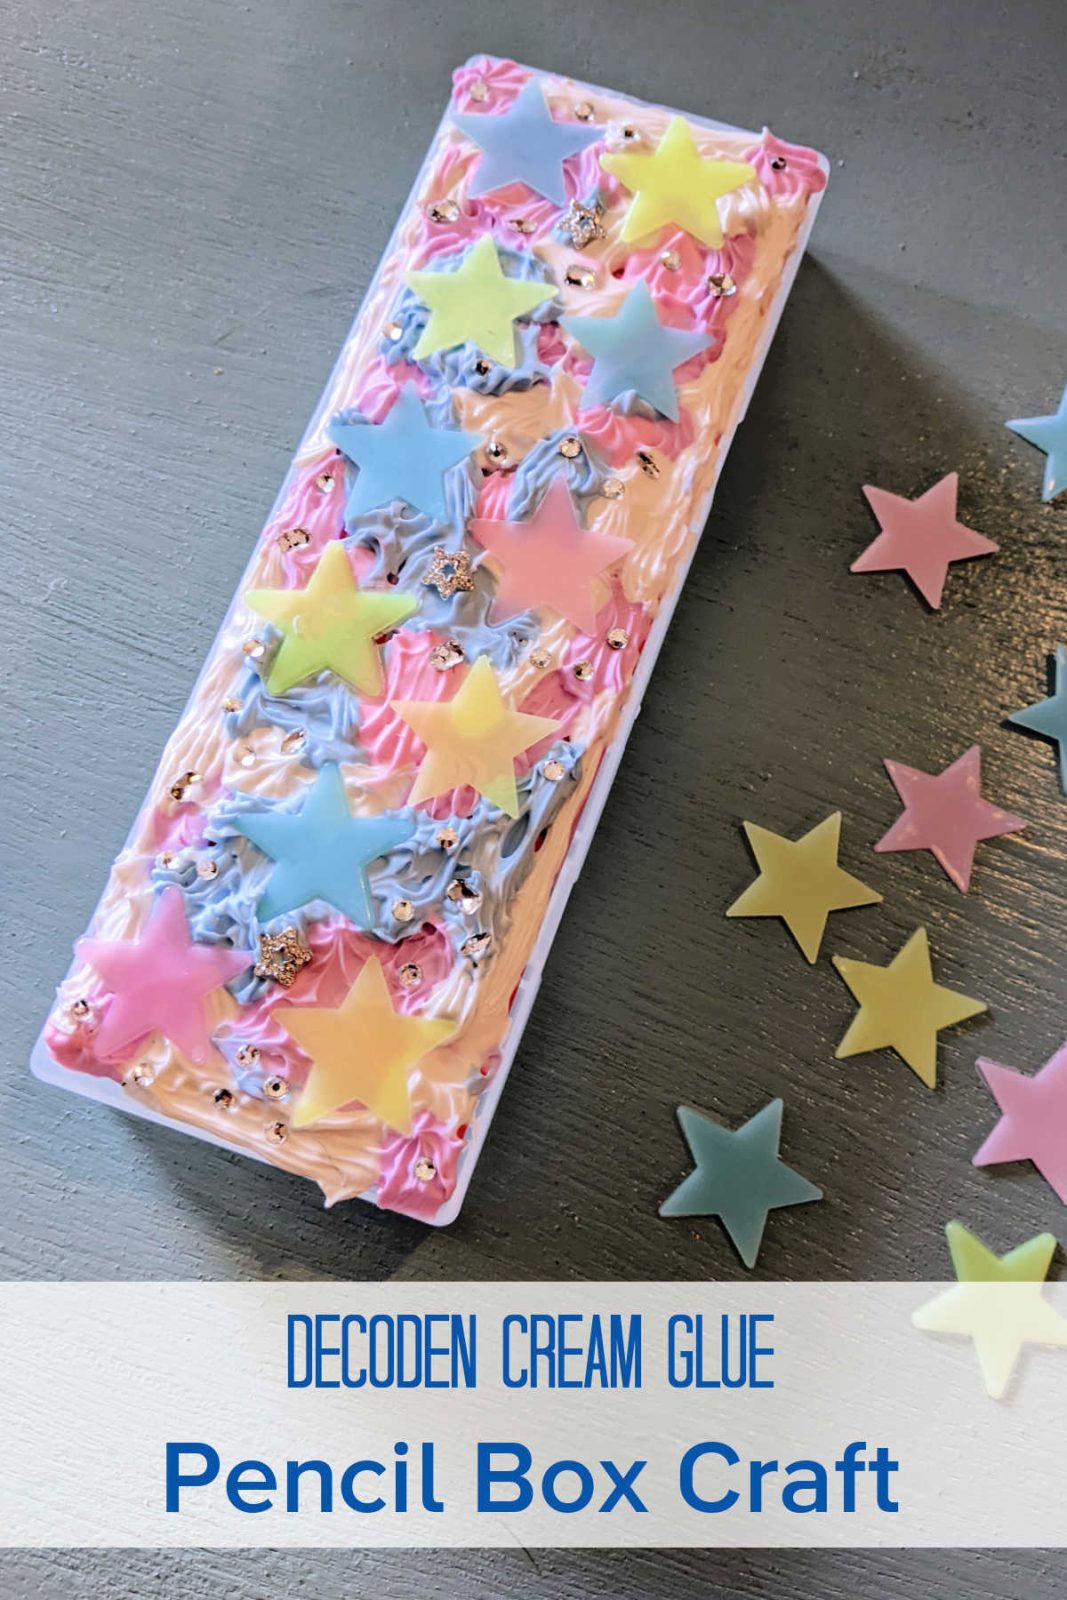 Blast off into a new school year with this out-of-this-world Glow-in-the-Dark Pencil Box Craft! Perfect for kids of all ages, this project uses whipped cream glue and glow-in-the-dark stars to create a customizable and functional pencil case. This is a fun and creative back-to-school activity that's sure to be a hit!